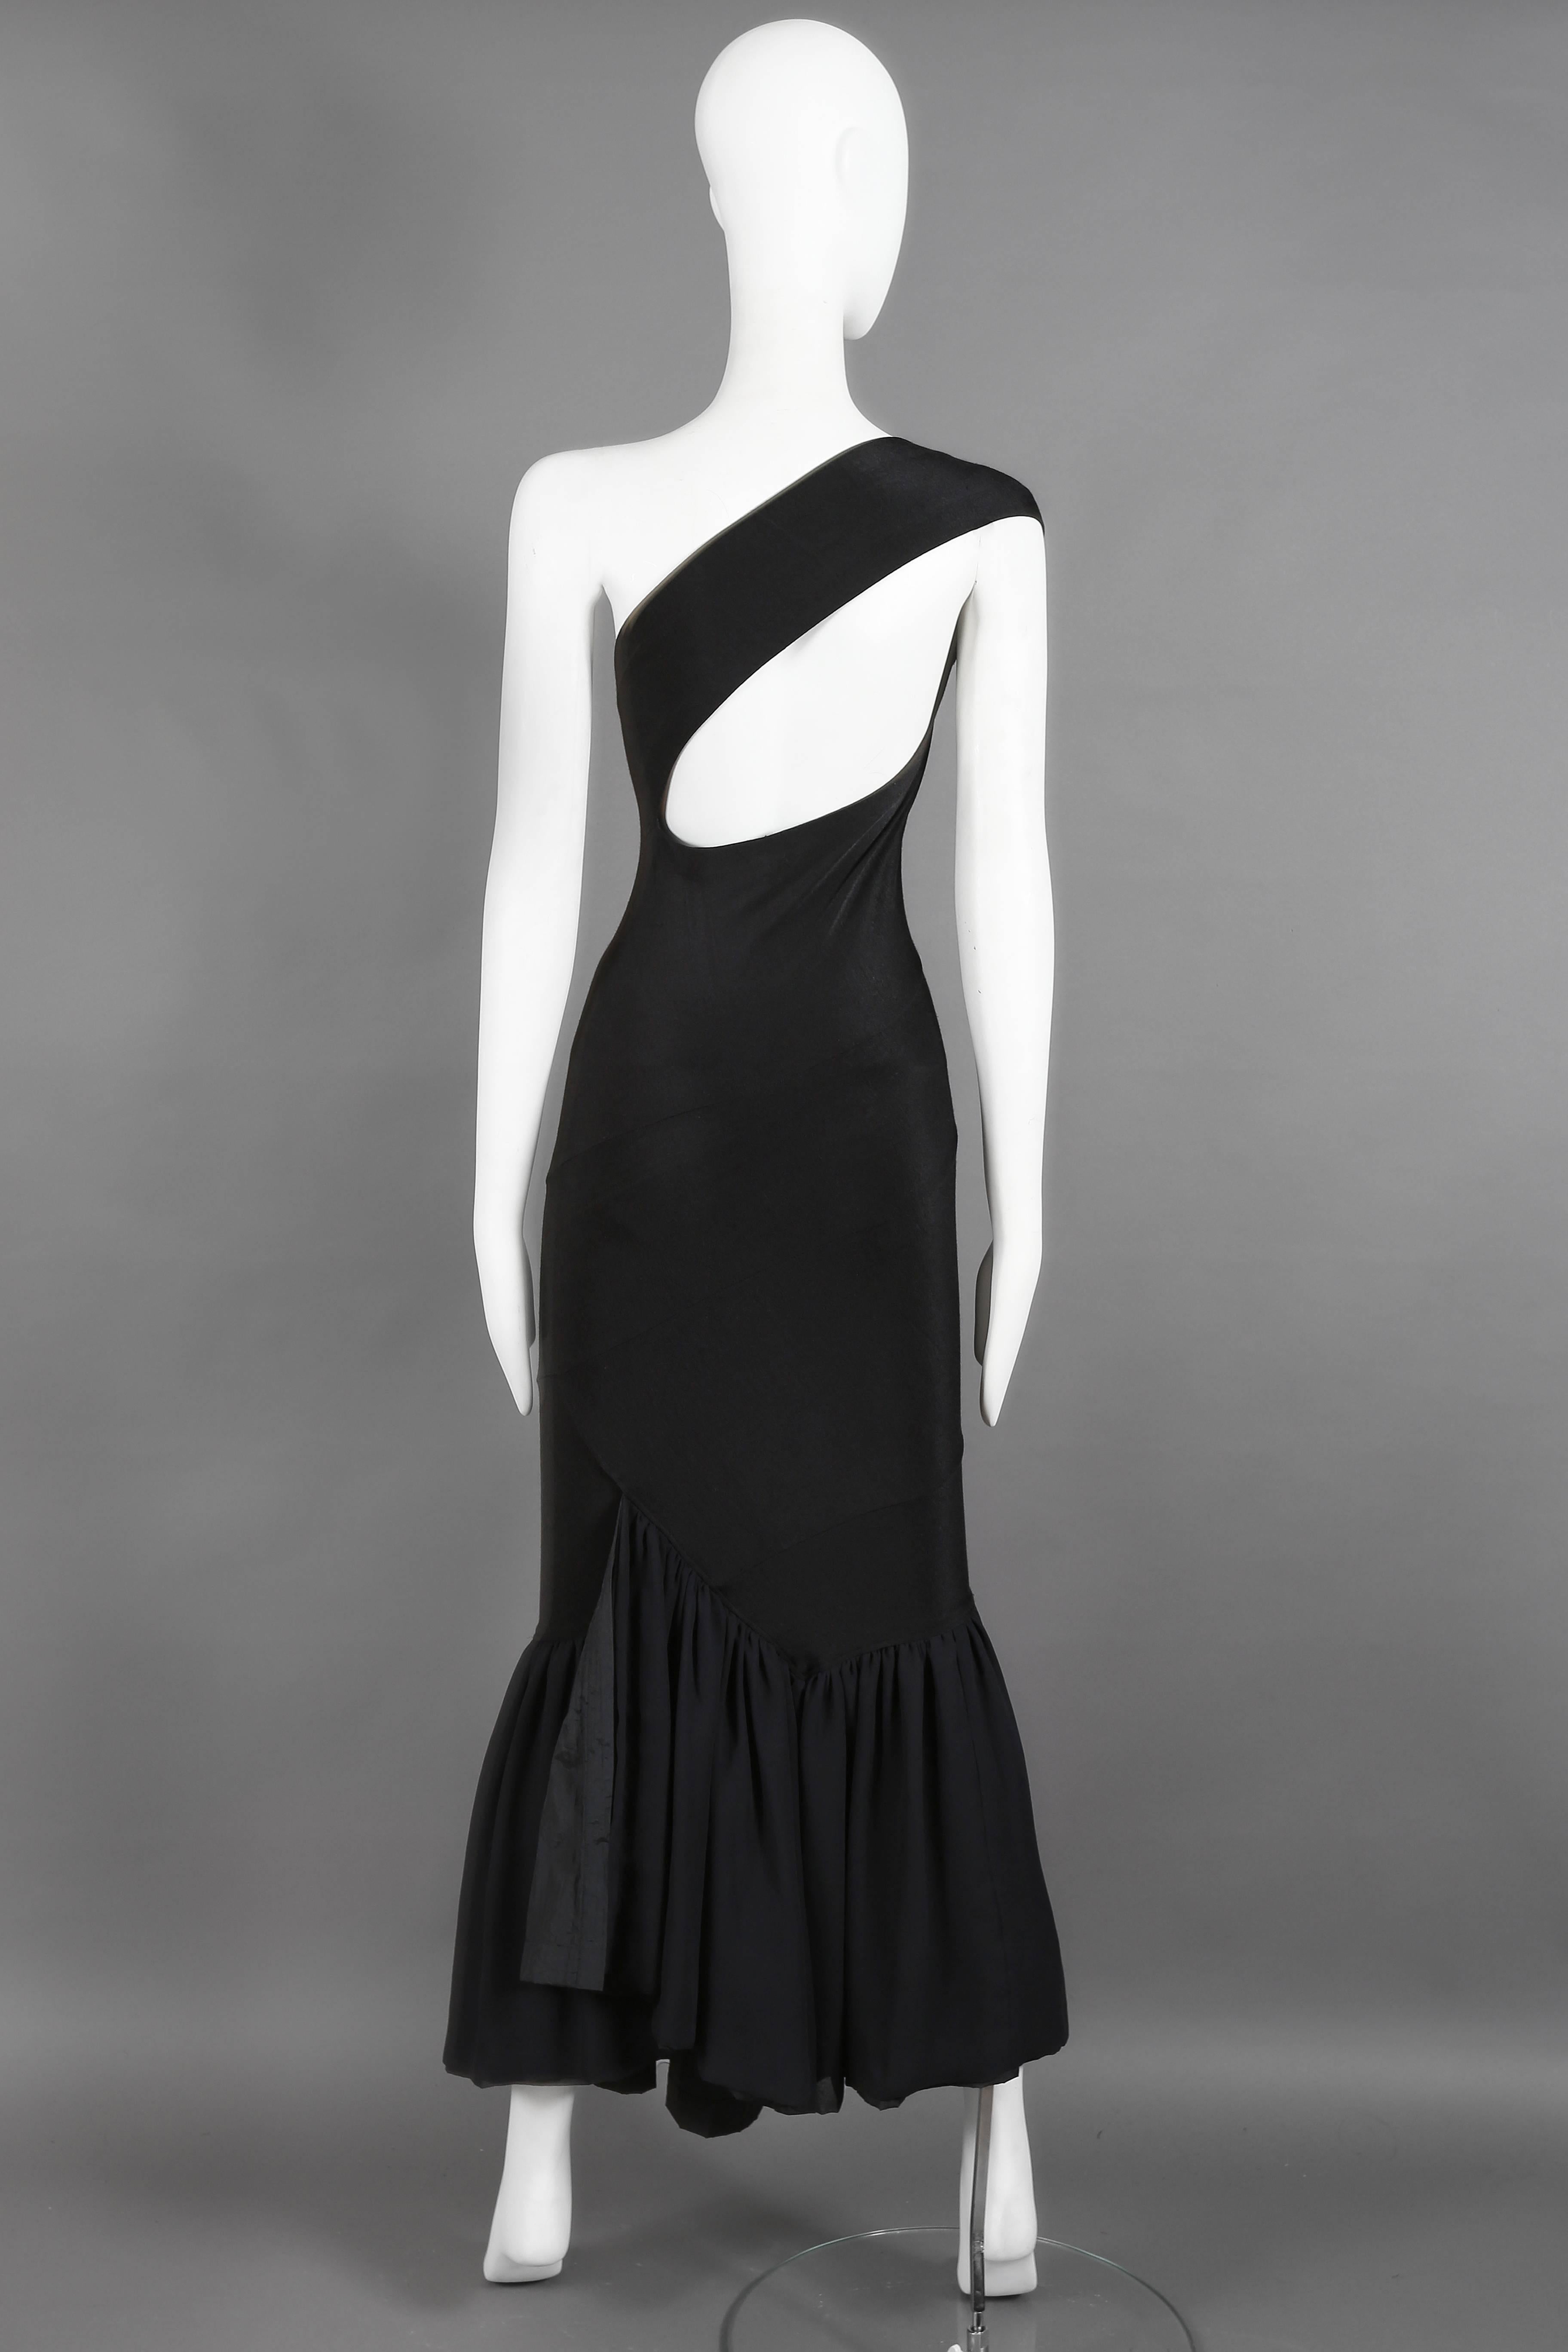 Women's Comme des Garcons bias cut knitted gown with fish tale skirt, circa 1986